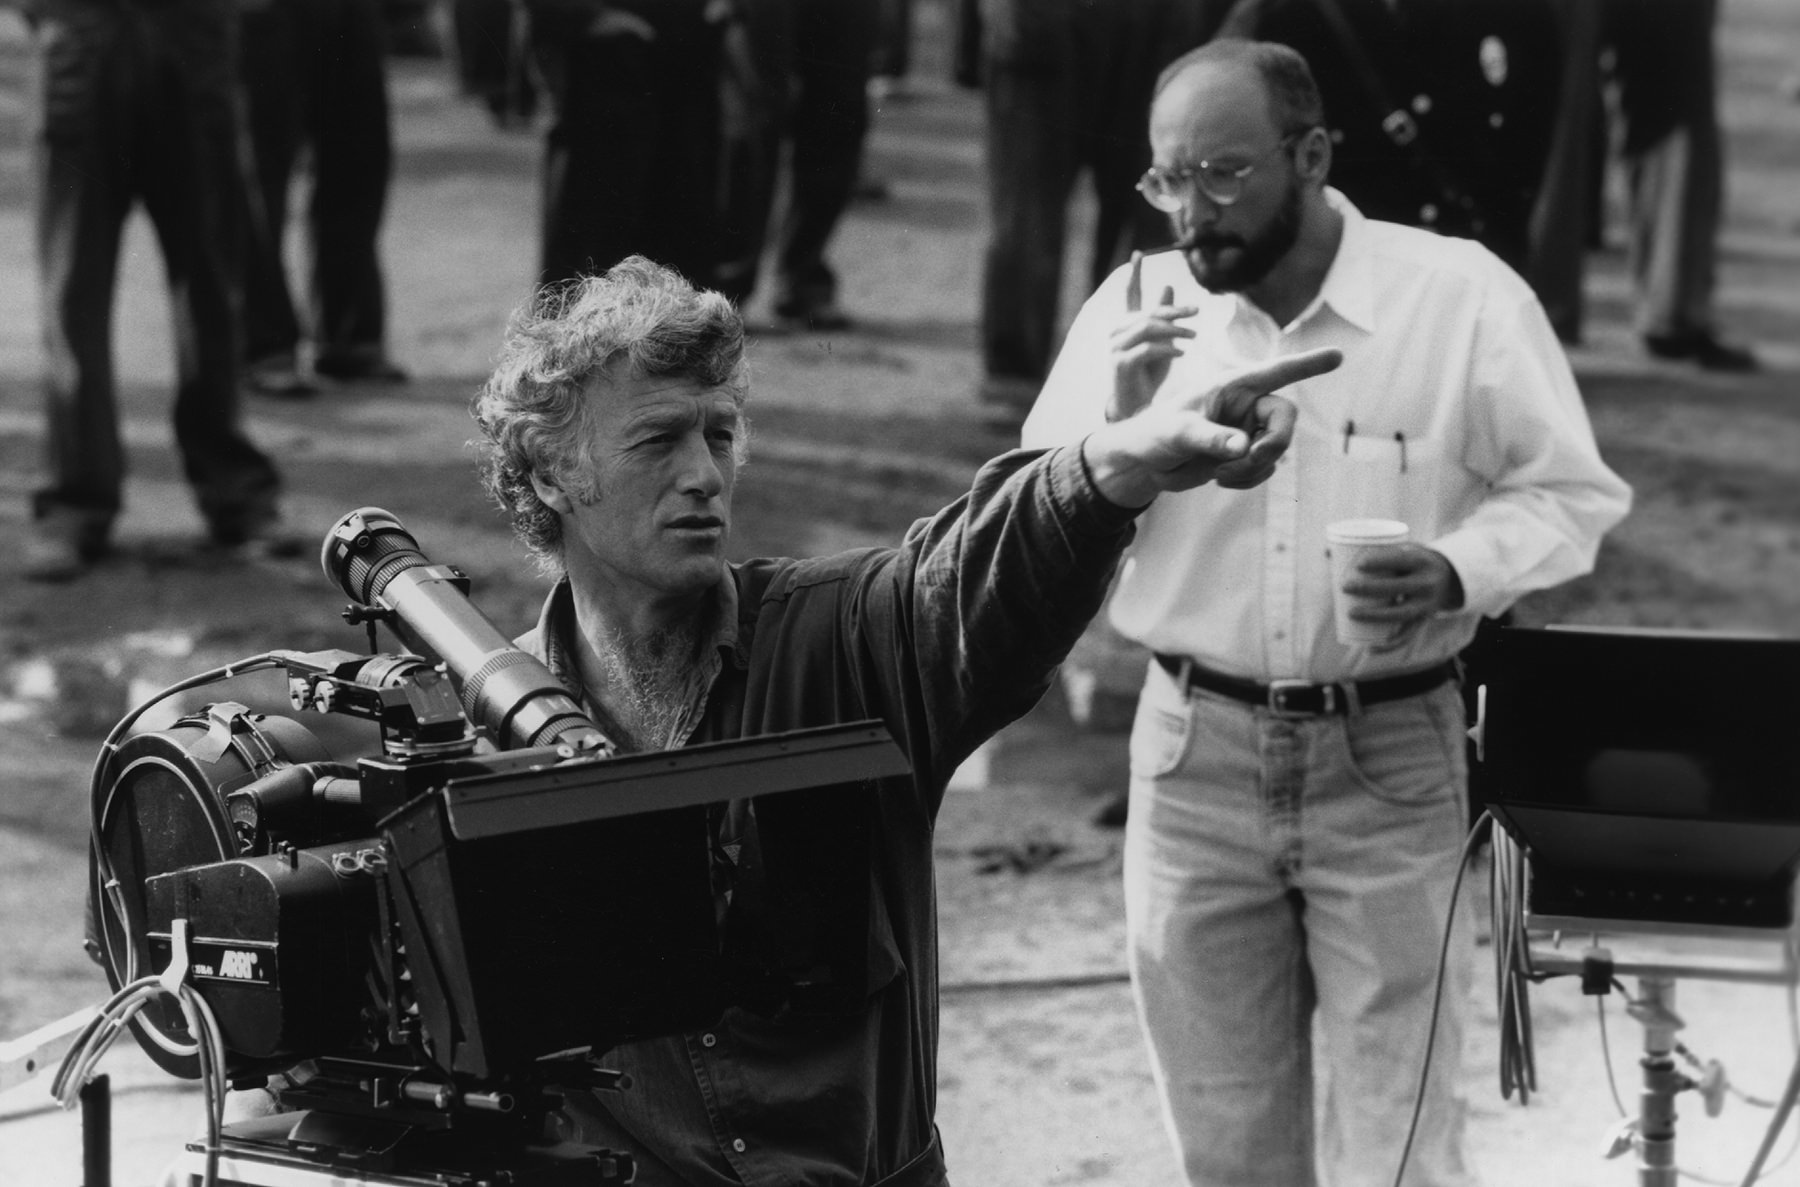 Deakins and Darabont plot a shot on location.